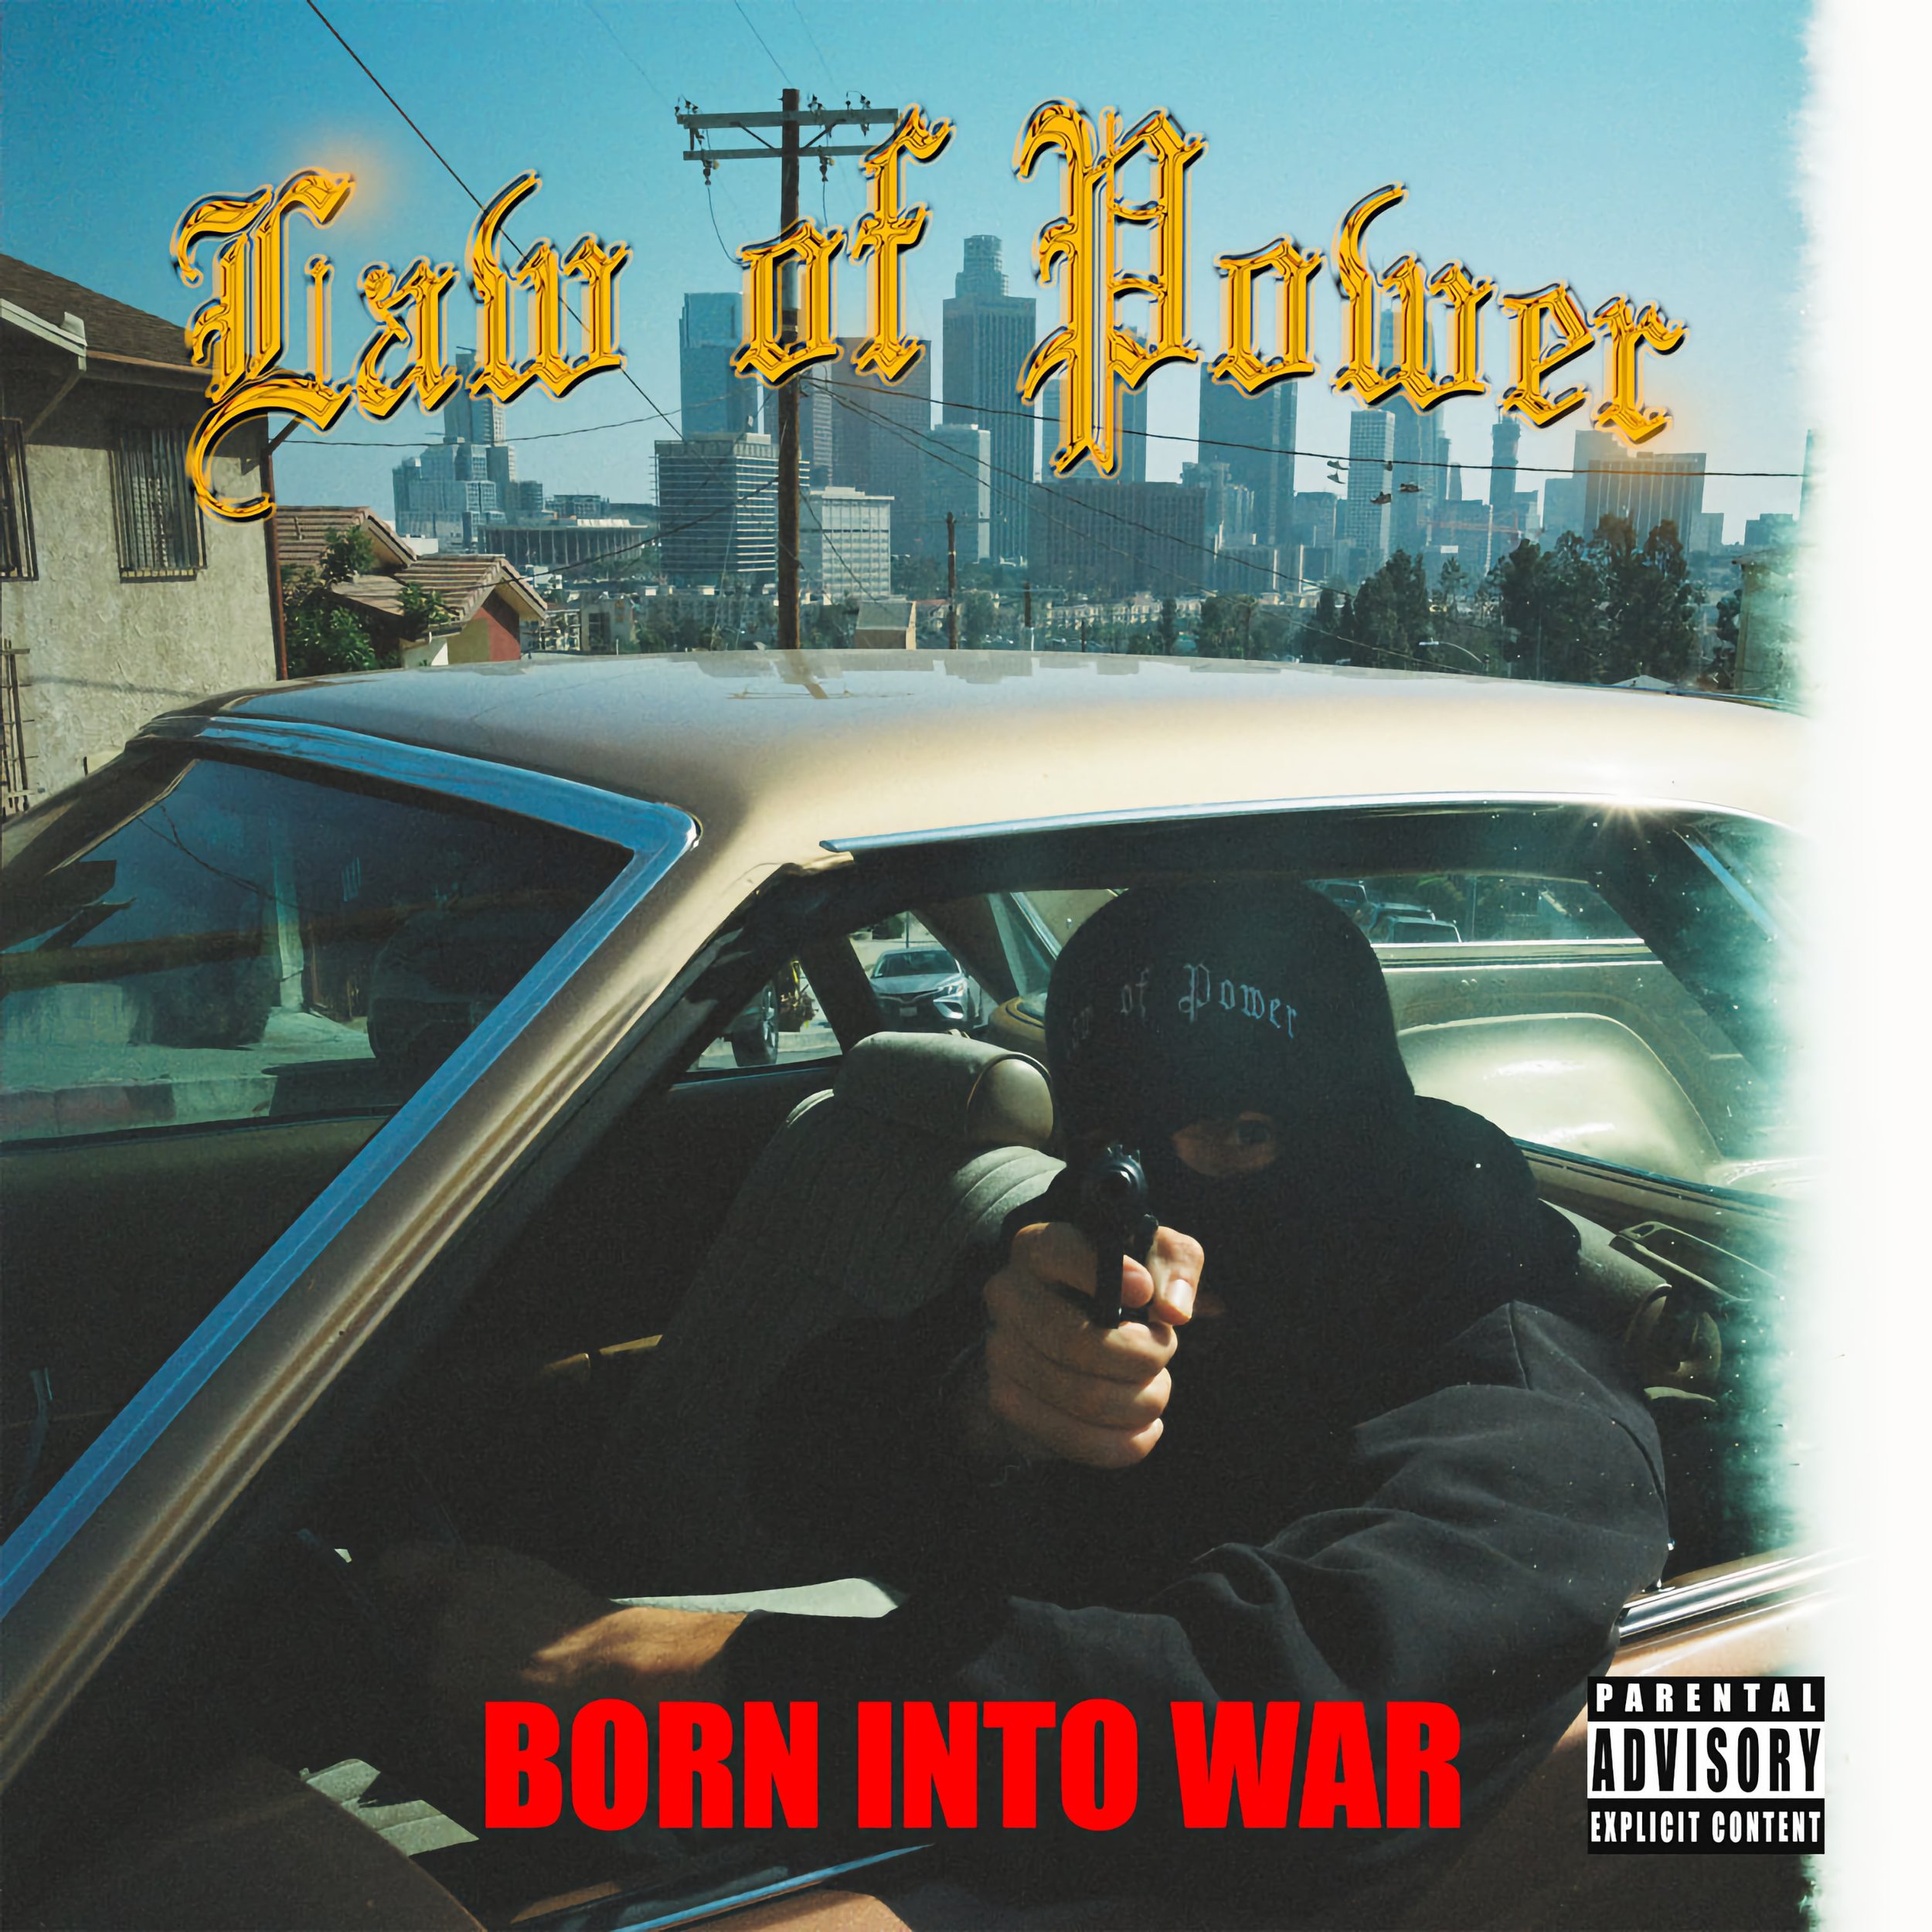 Law Of Power - Born Into War - Cover.jpg